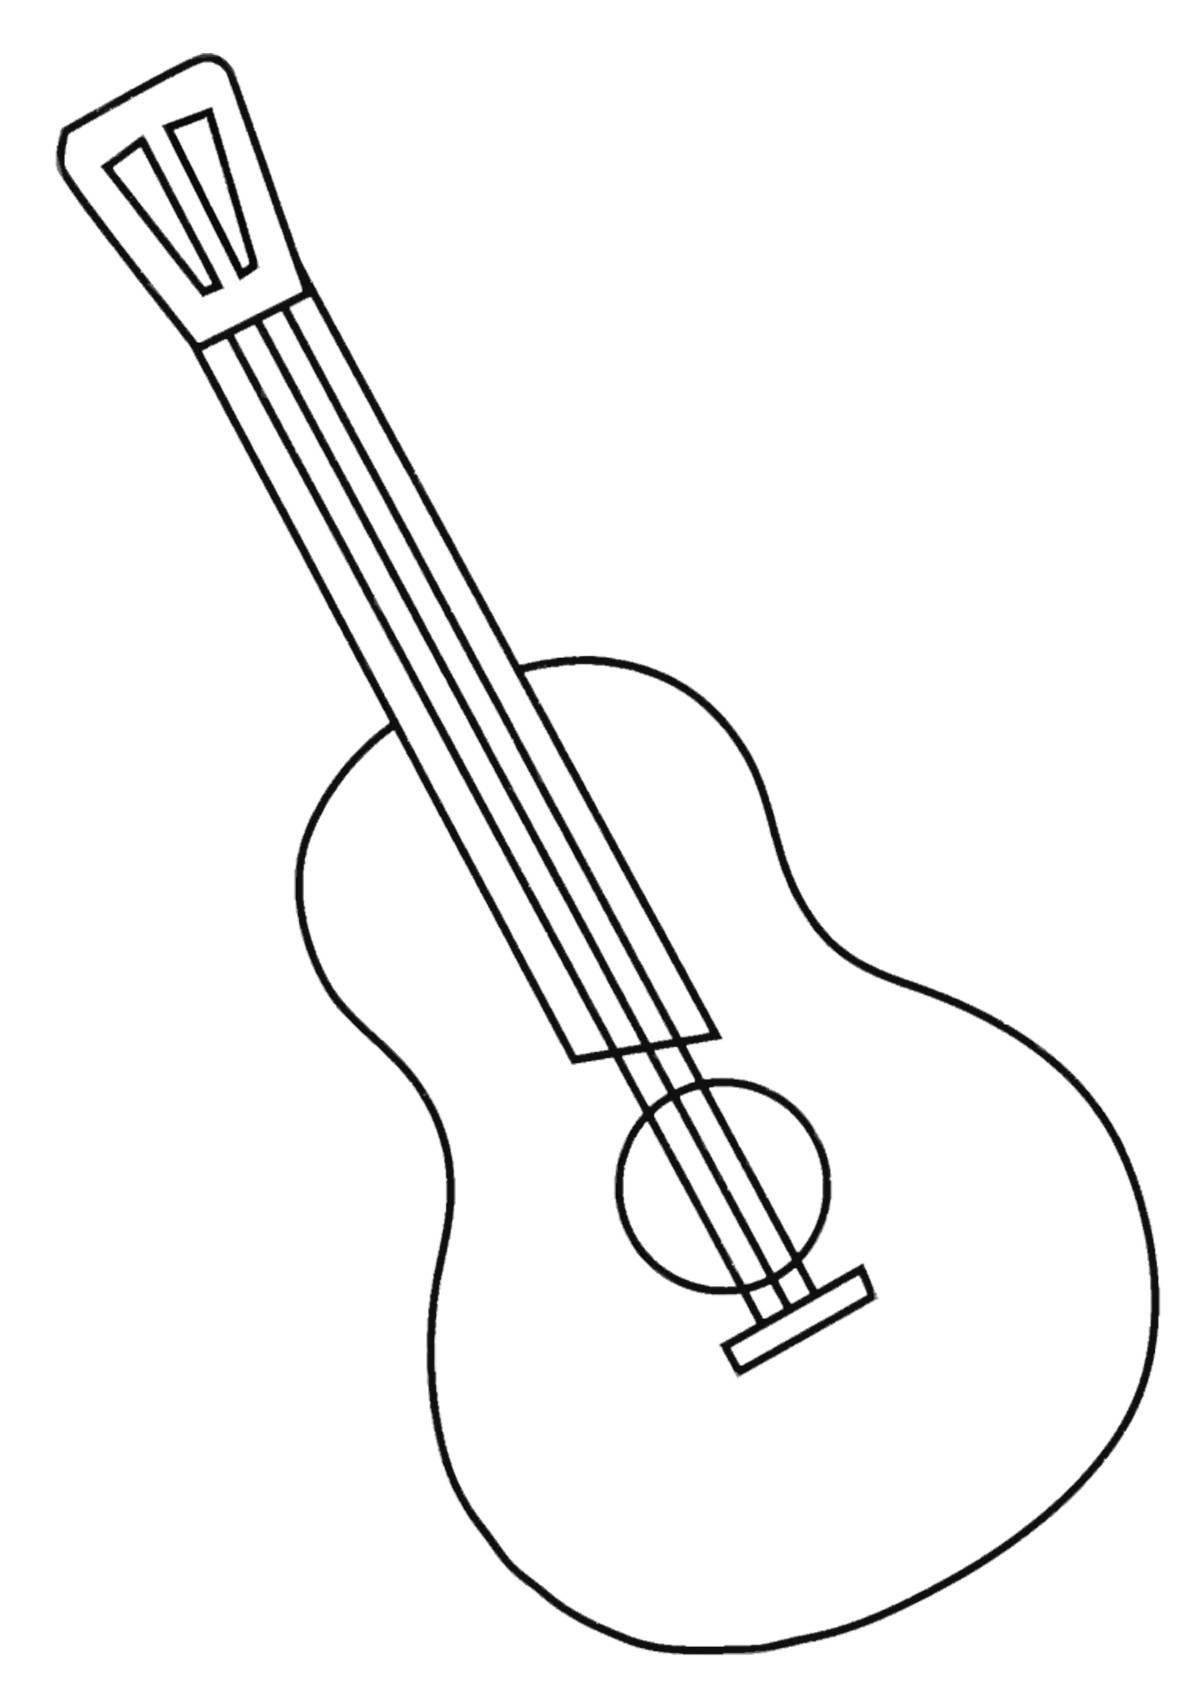 Delightful musical instruments coloring 1st grade